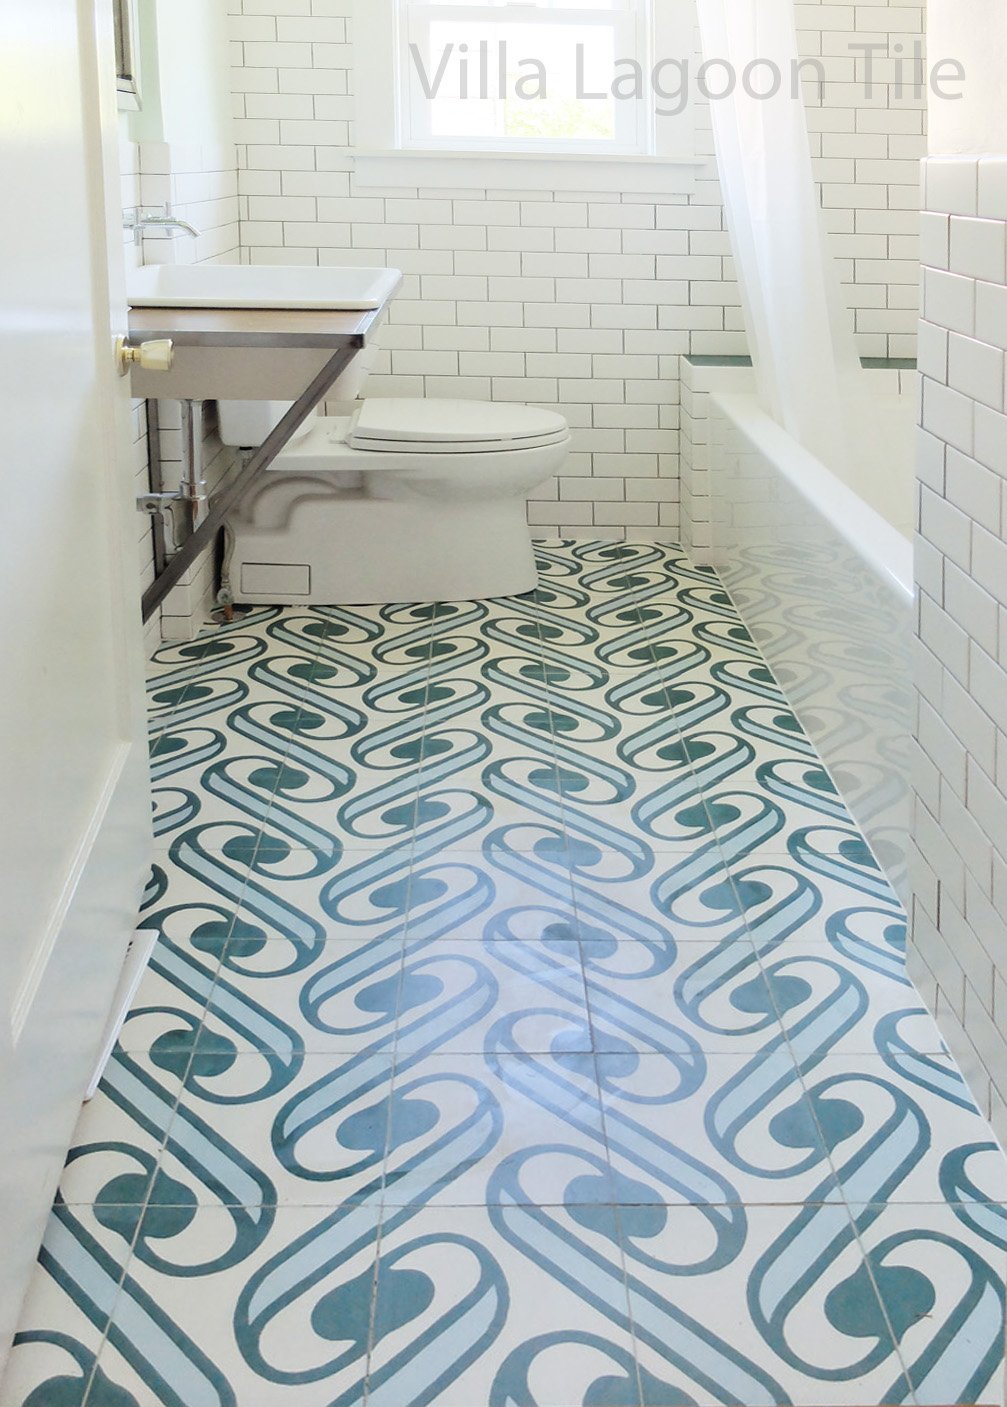 Villa Lagoon Tile's exclusive "Surf Agua" cement tile, paired with subway tiles in a white bathroom.